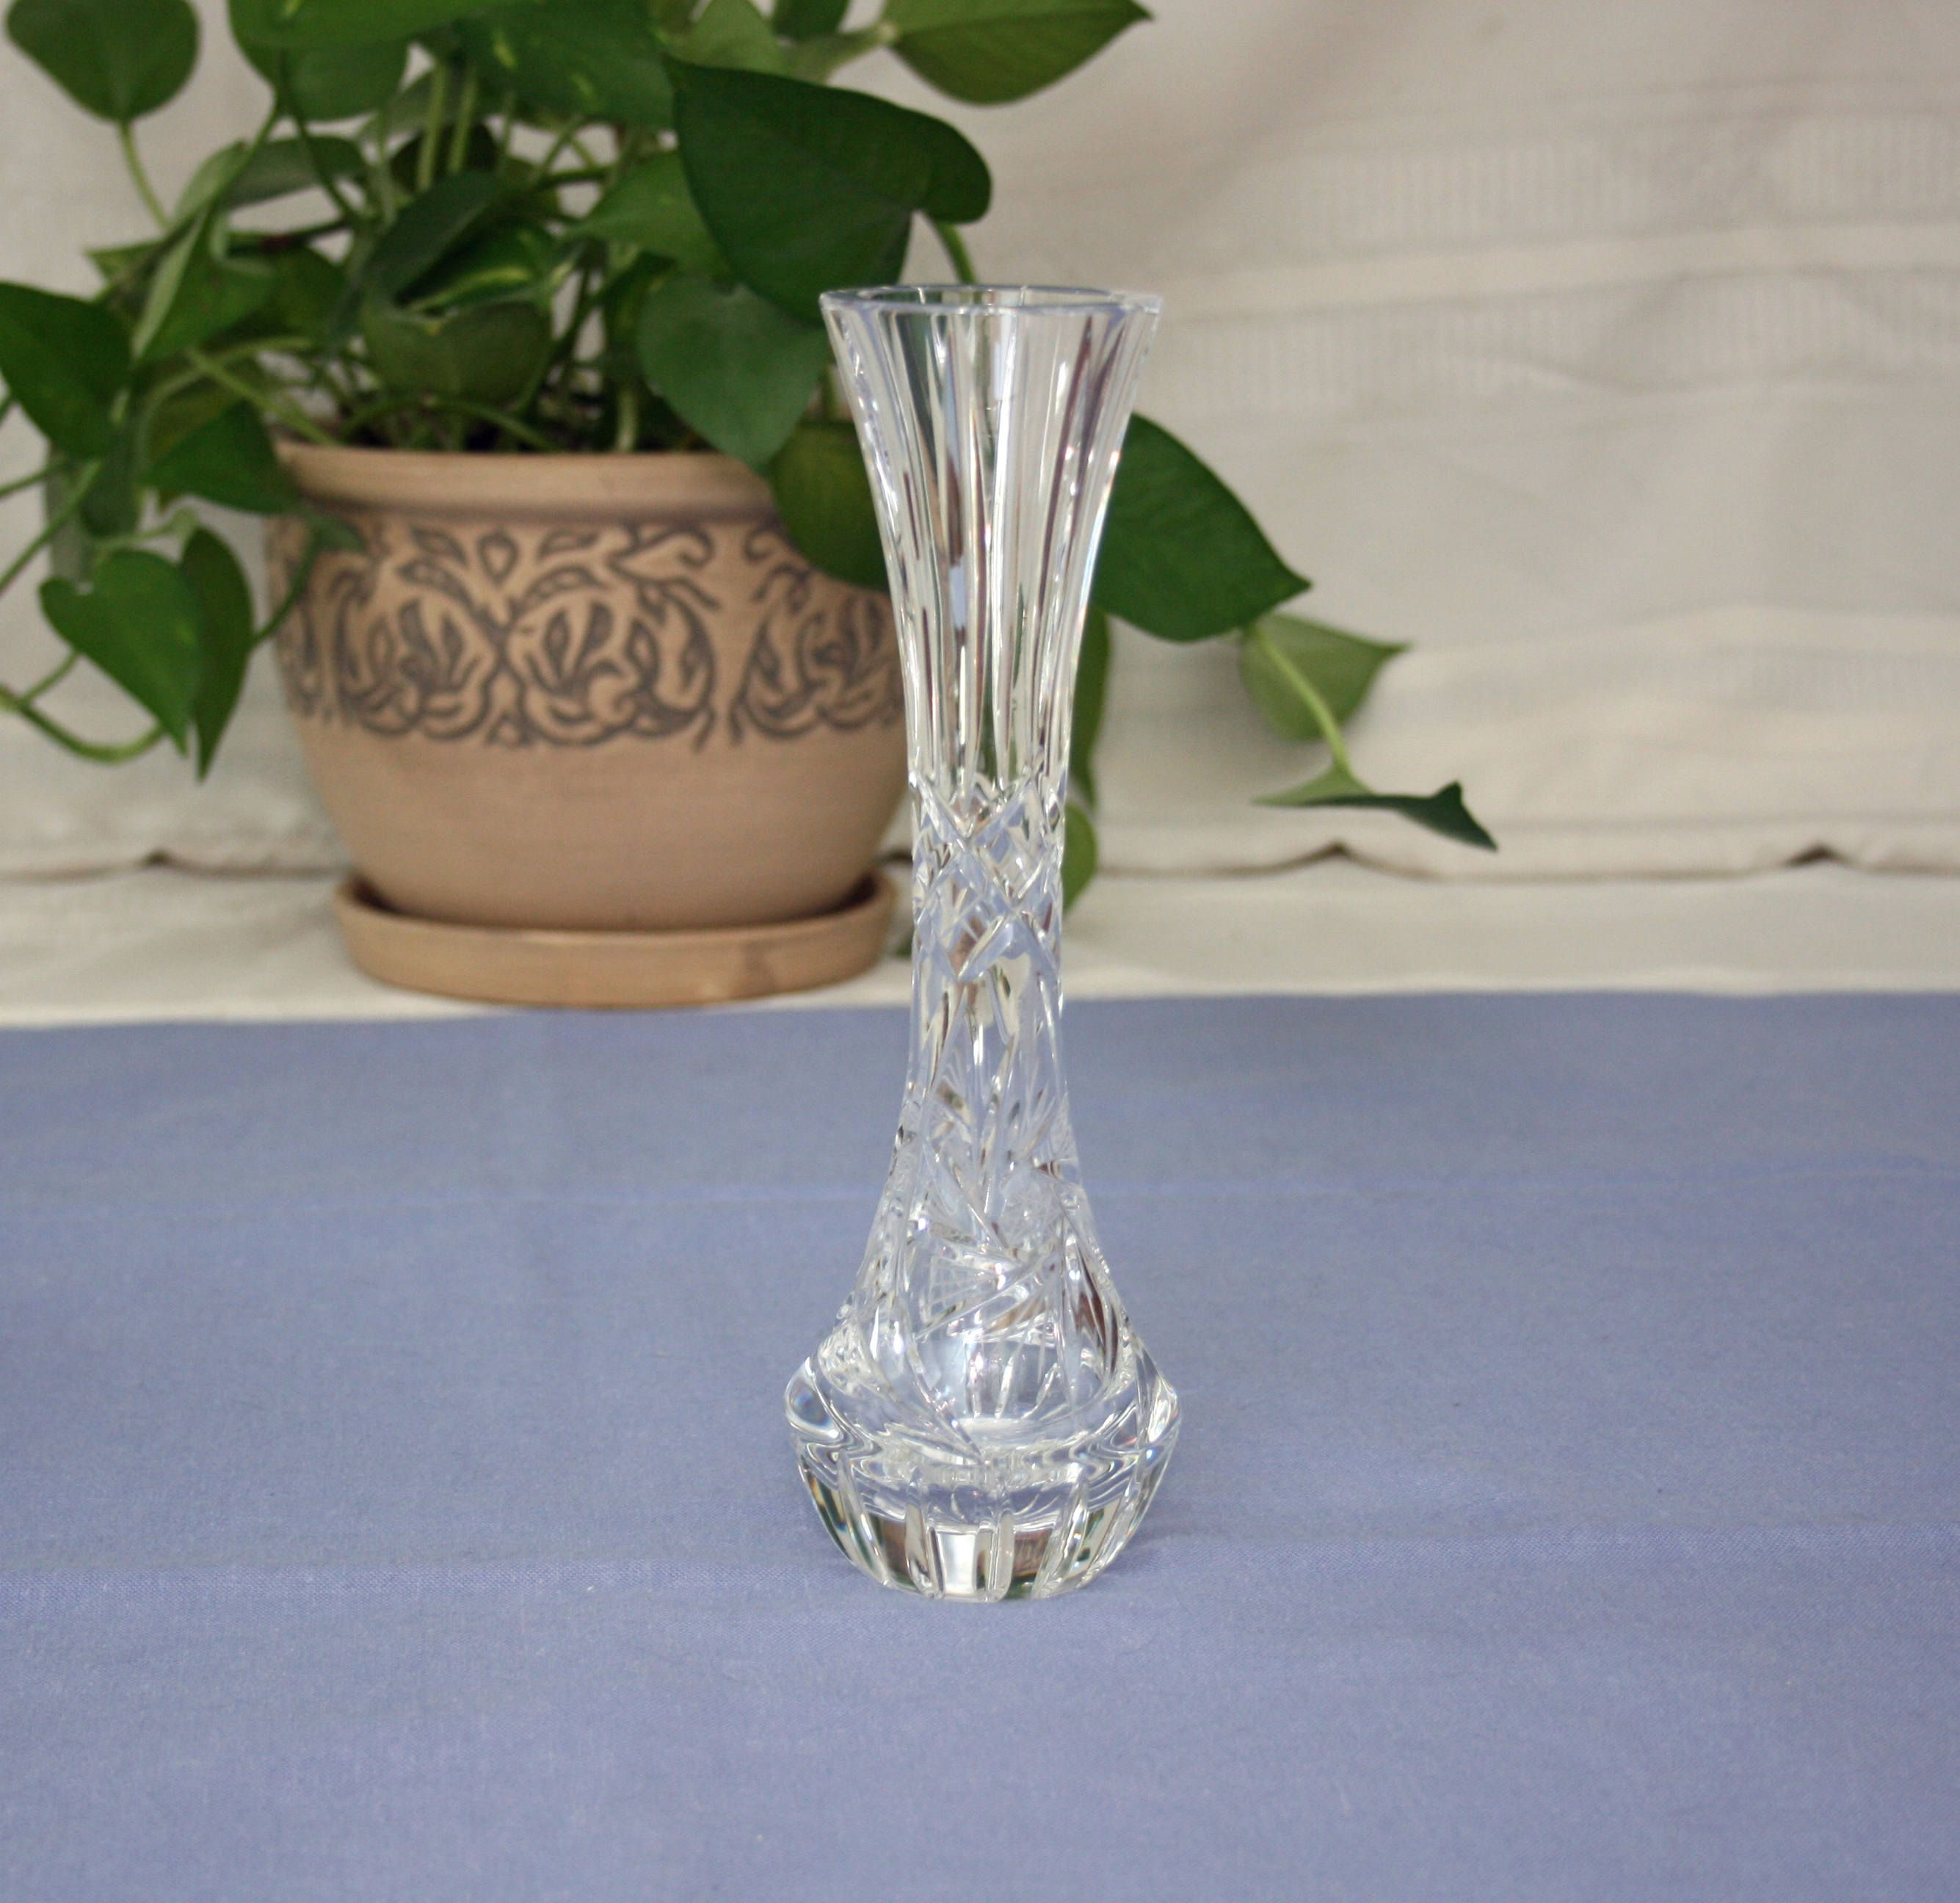 24 Fabulous Waterford Bud Vase 2024 free download waterford bud vase of vintage pair 6 inch pressed glass candlesticks with hand c throughout vintage lead crystal fluted bud vase hand cut swirled star pinwheel flower glass vase home decor